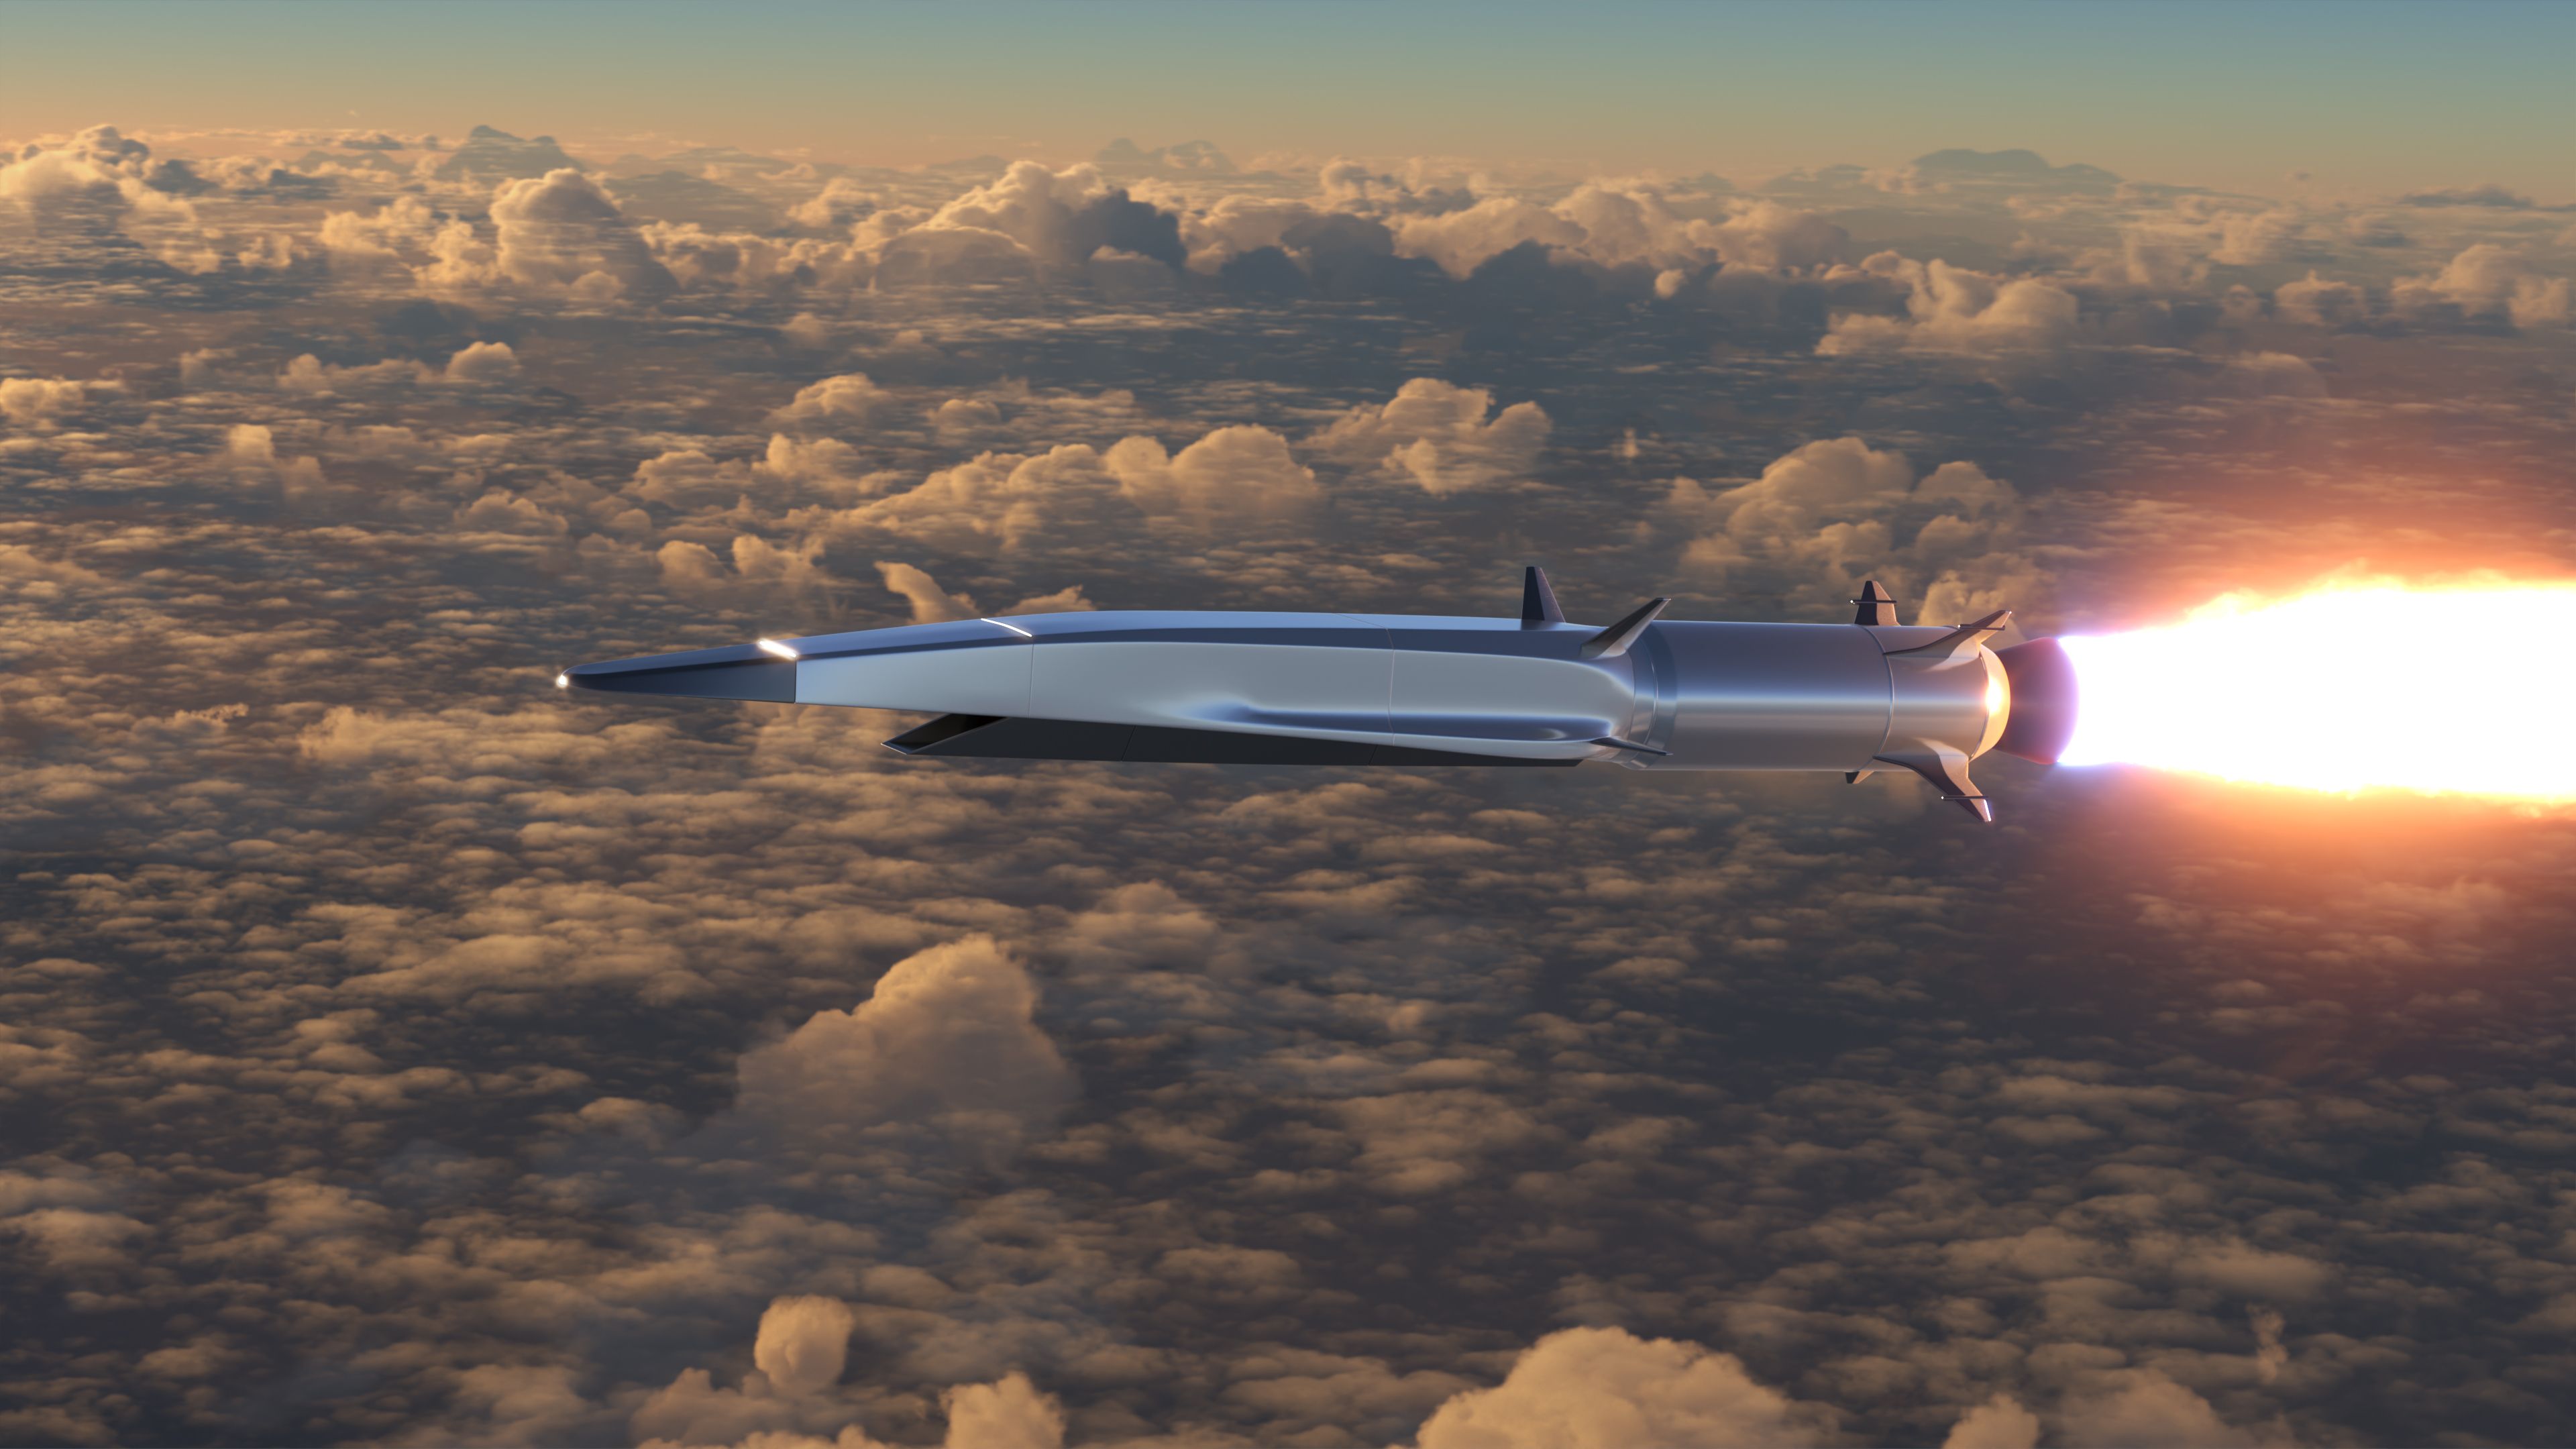 hypersonic-rocket-flies-above-the-clouds-royalty-free-image-1676330497.jpg